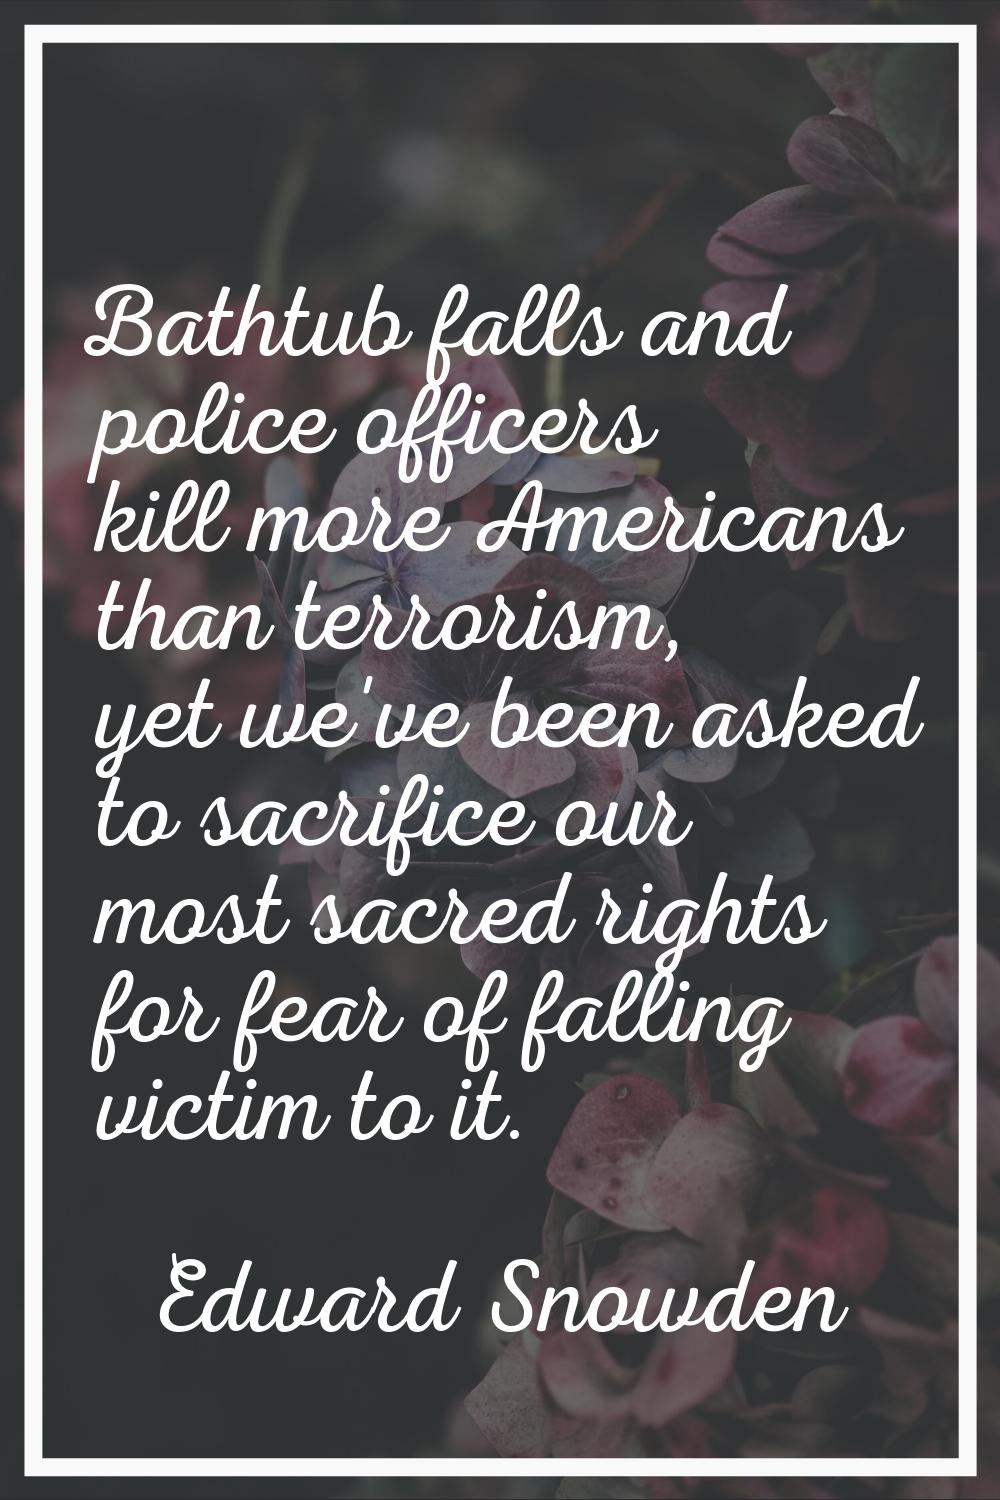 Bathtub falls and police officers kill more Americans than terrorism, yet we've been asked to sacri